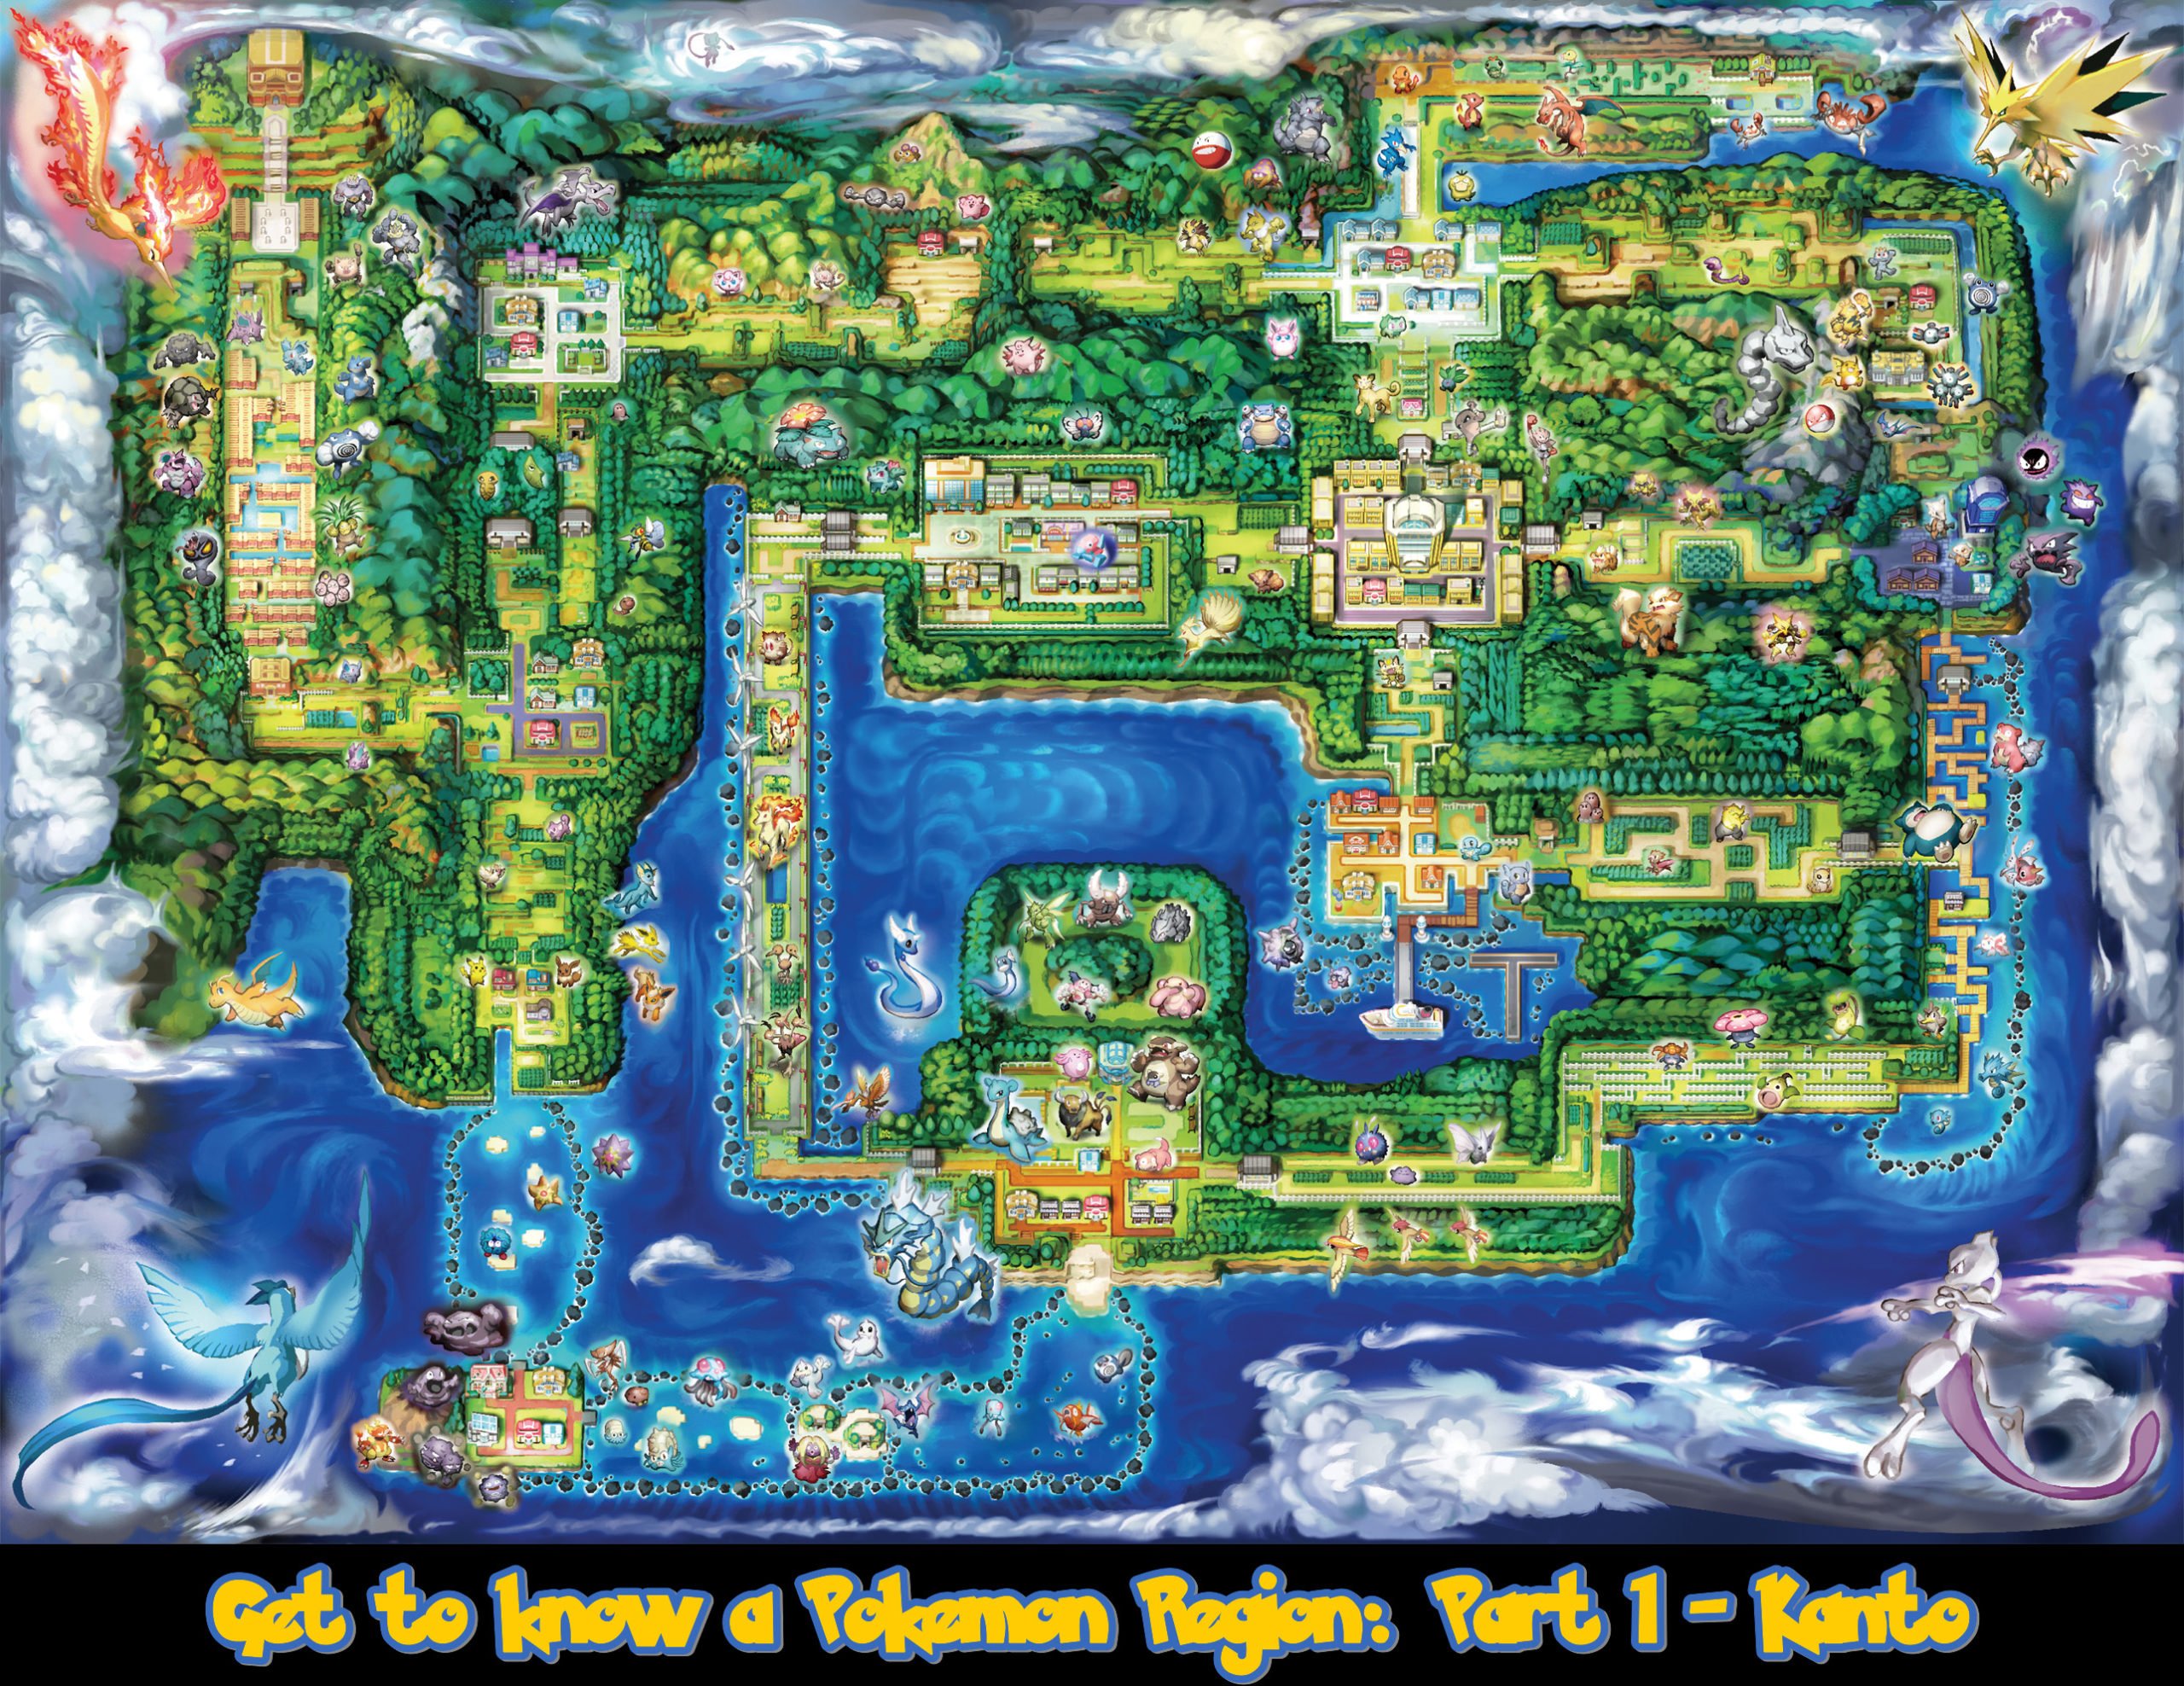 Get to know a region: Part 1 – Kanto